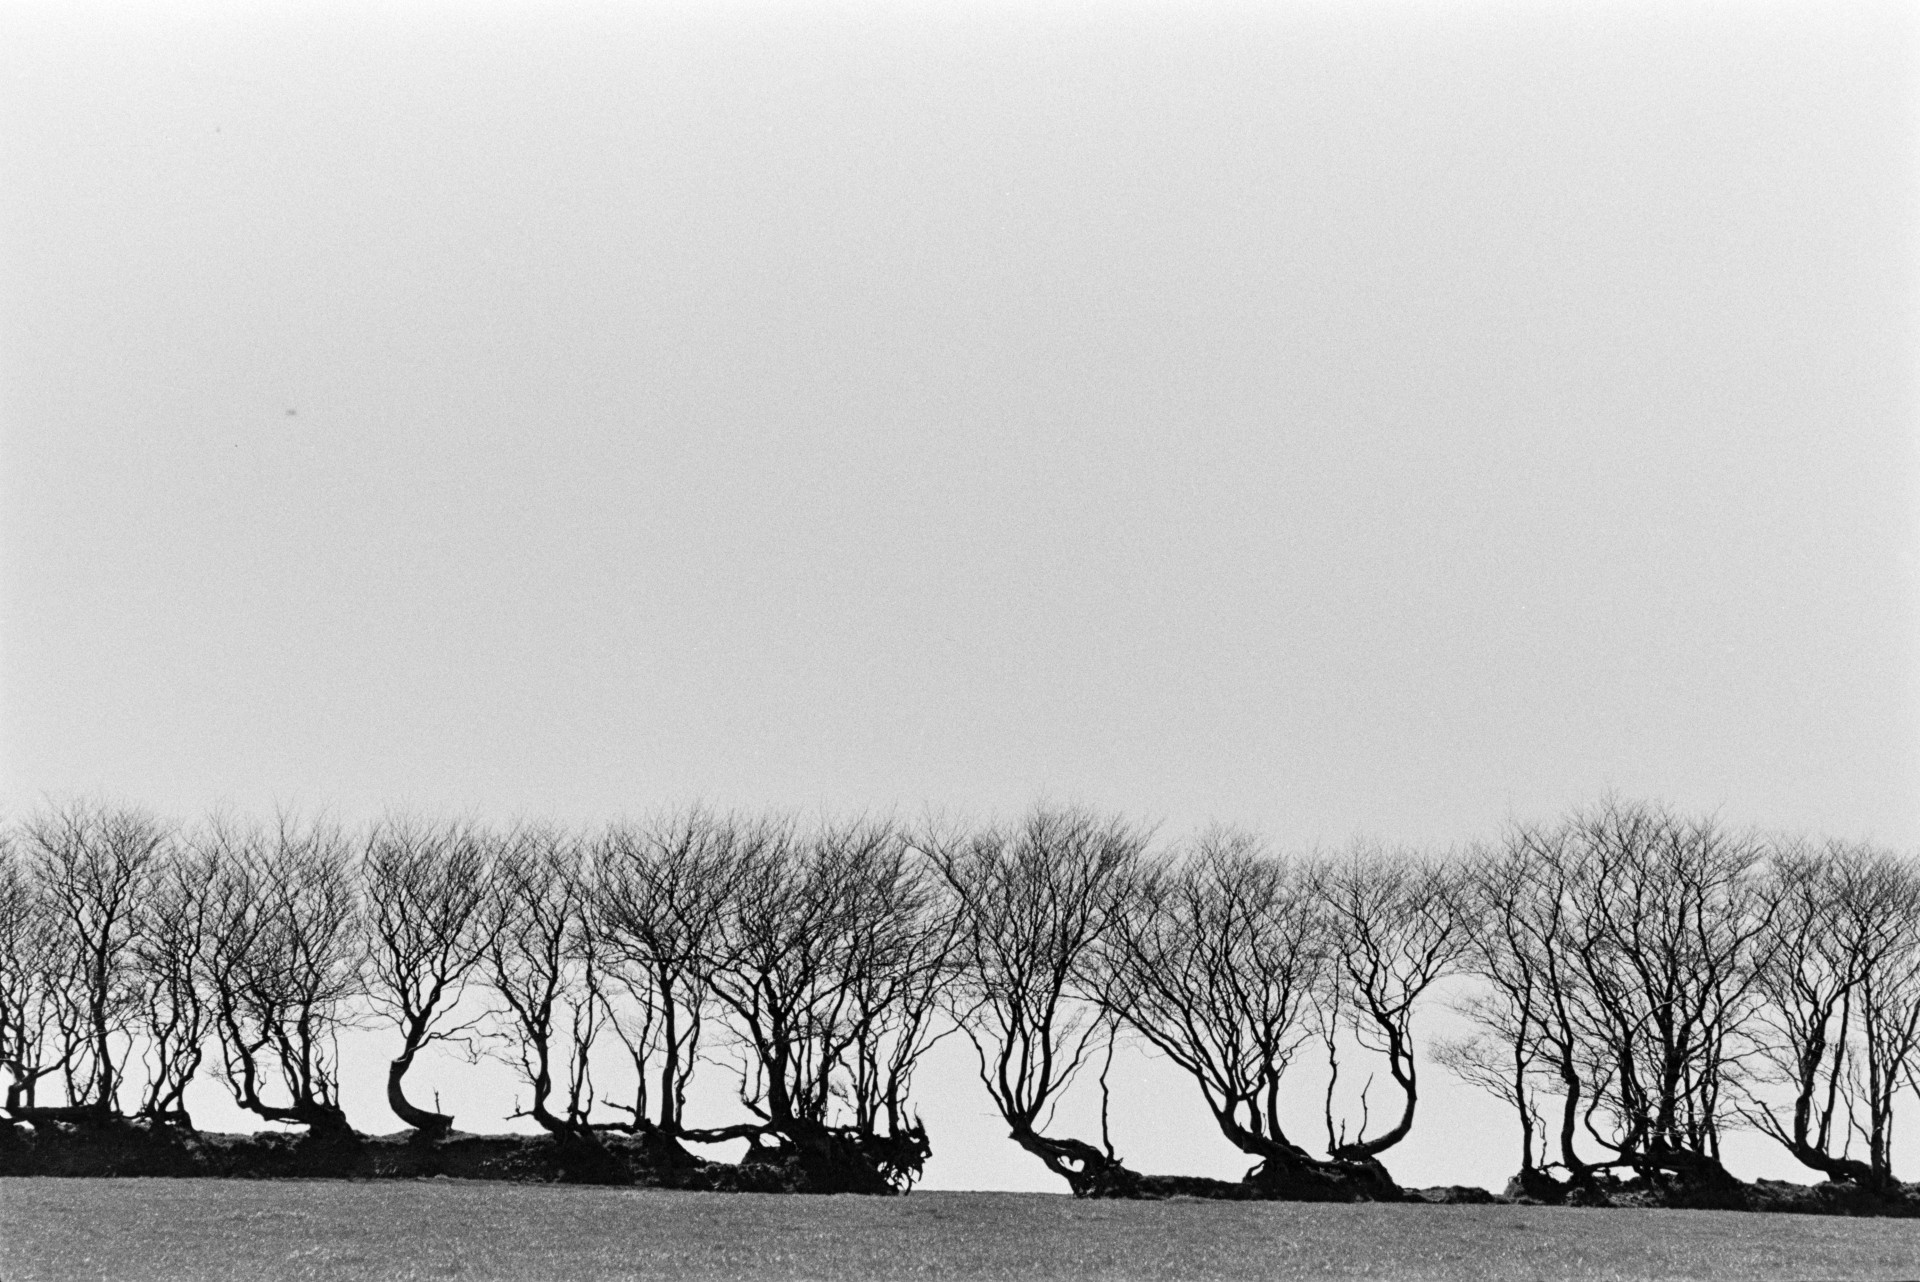 Knarled trees growing in a hedgerow at Combe Martin.